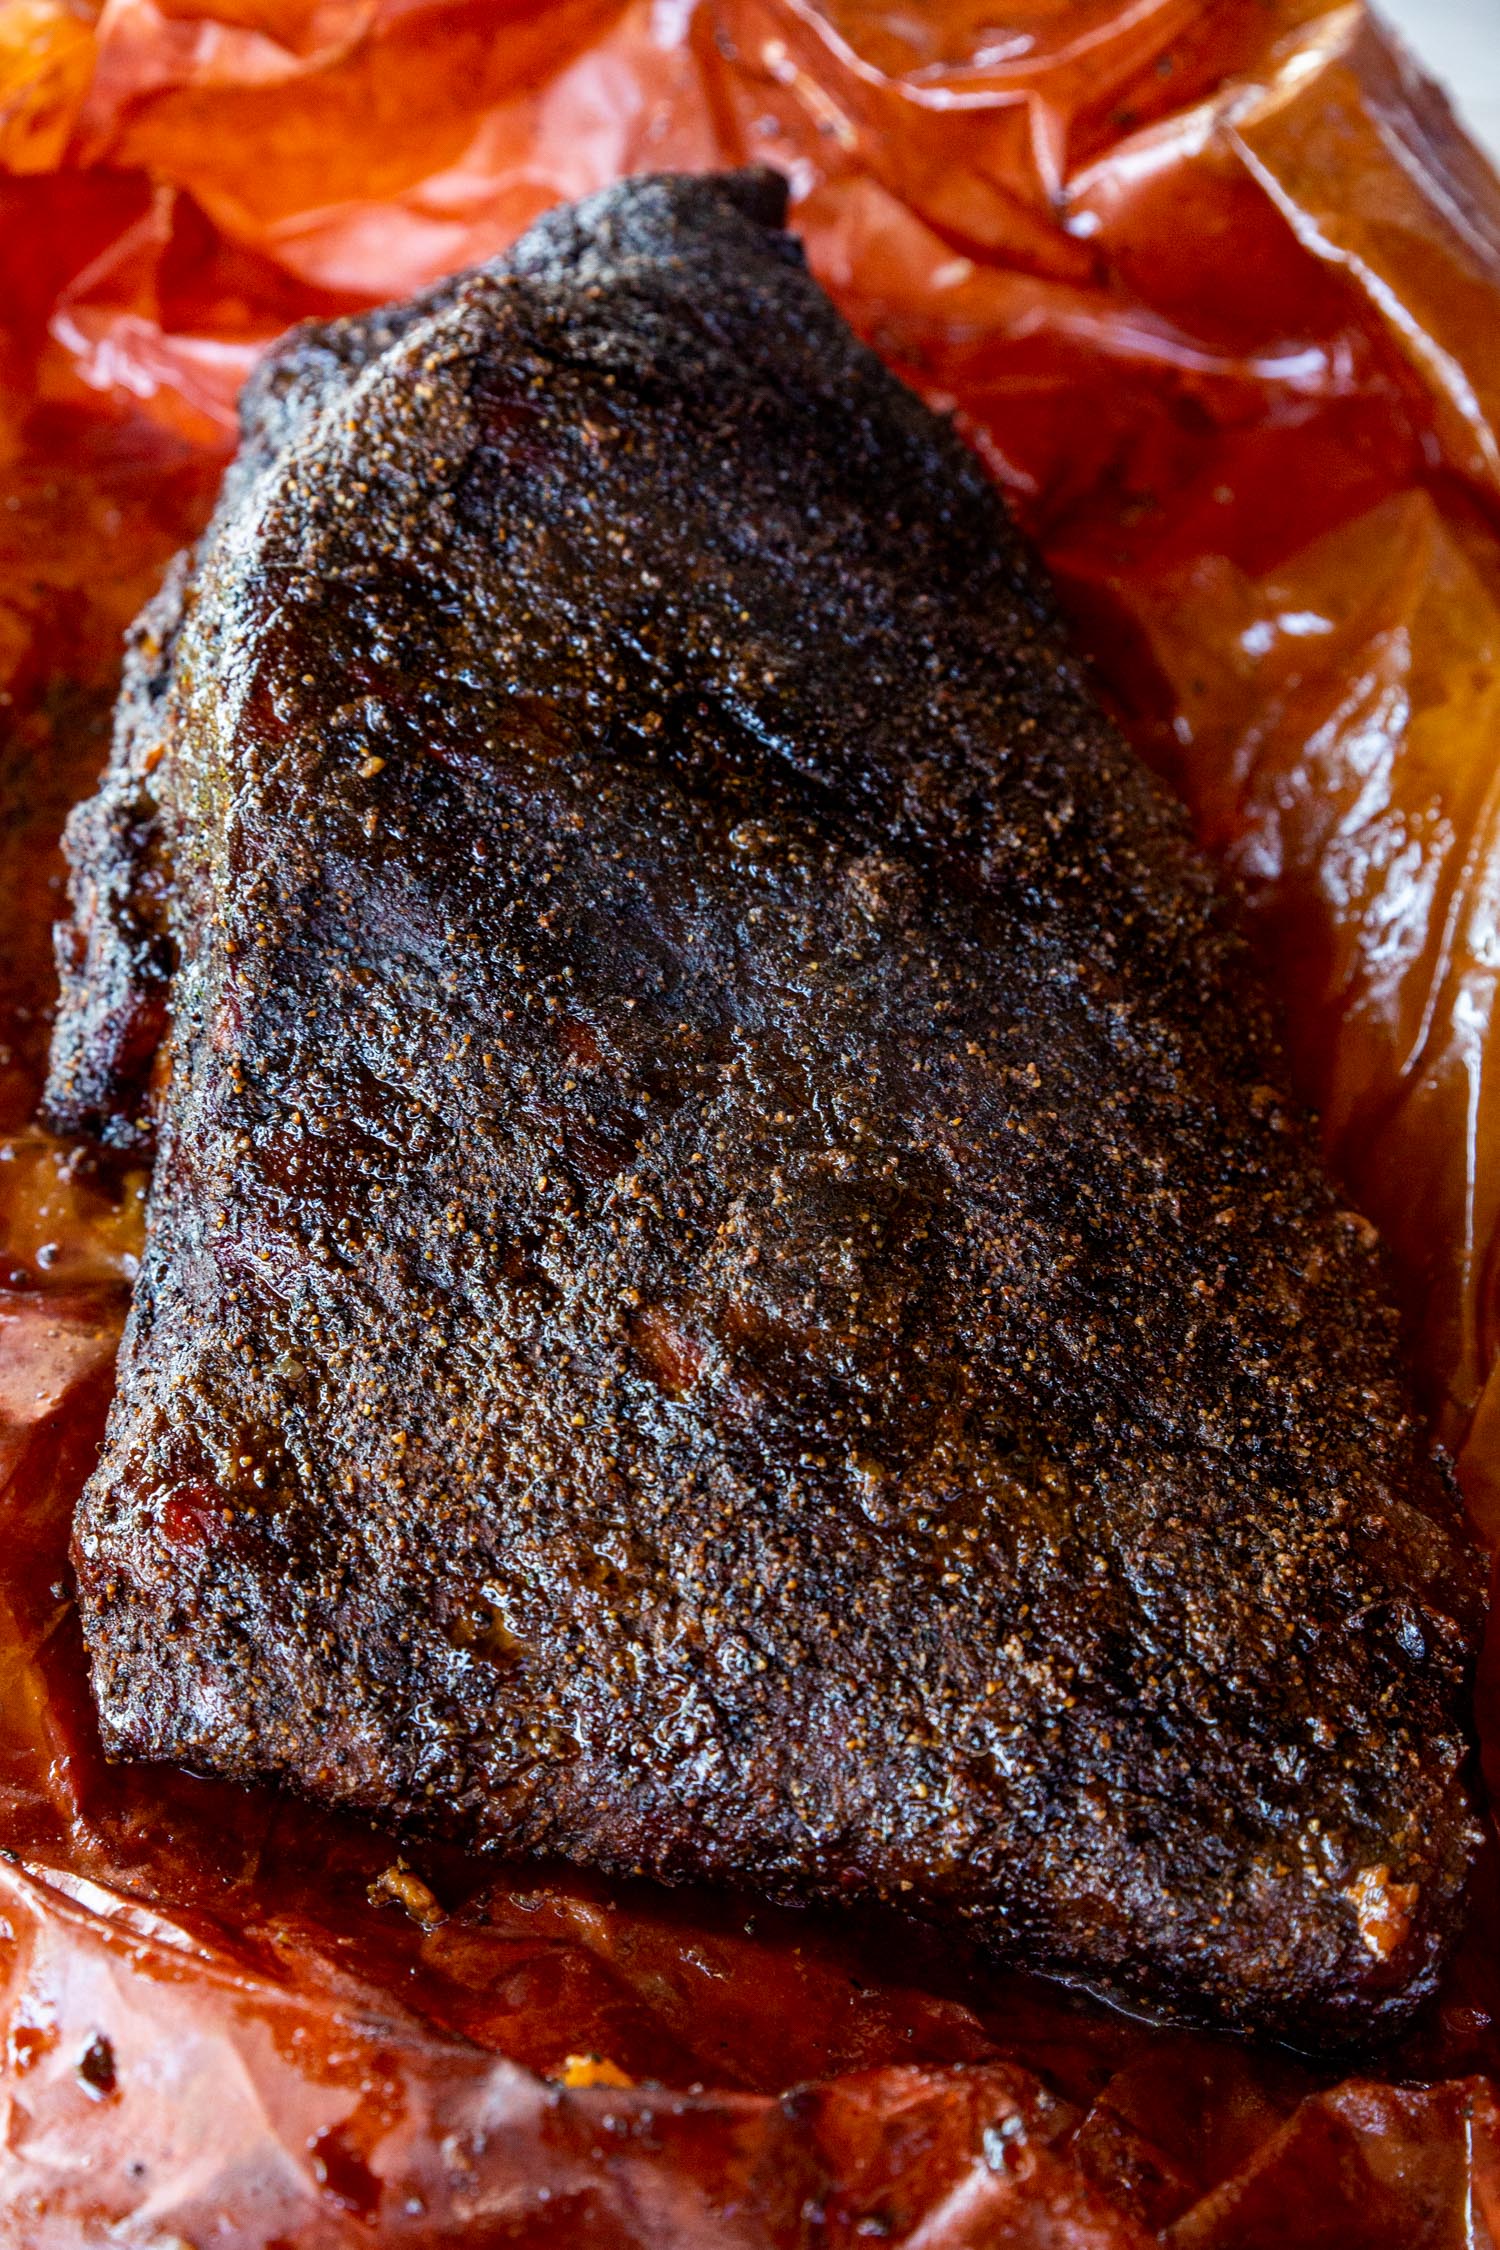 A 10 lb. brisket smoked and in peach butcher paper